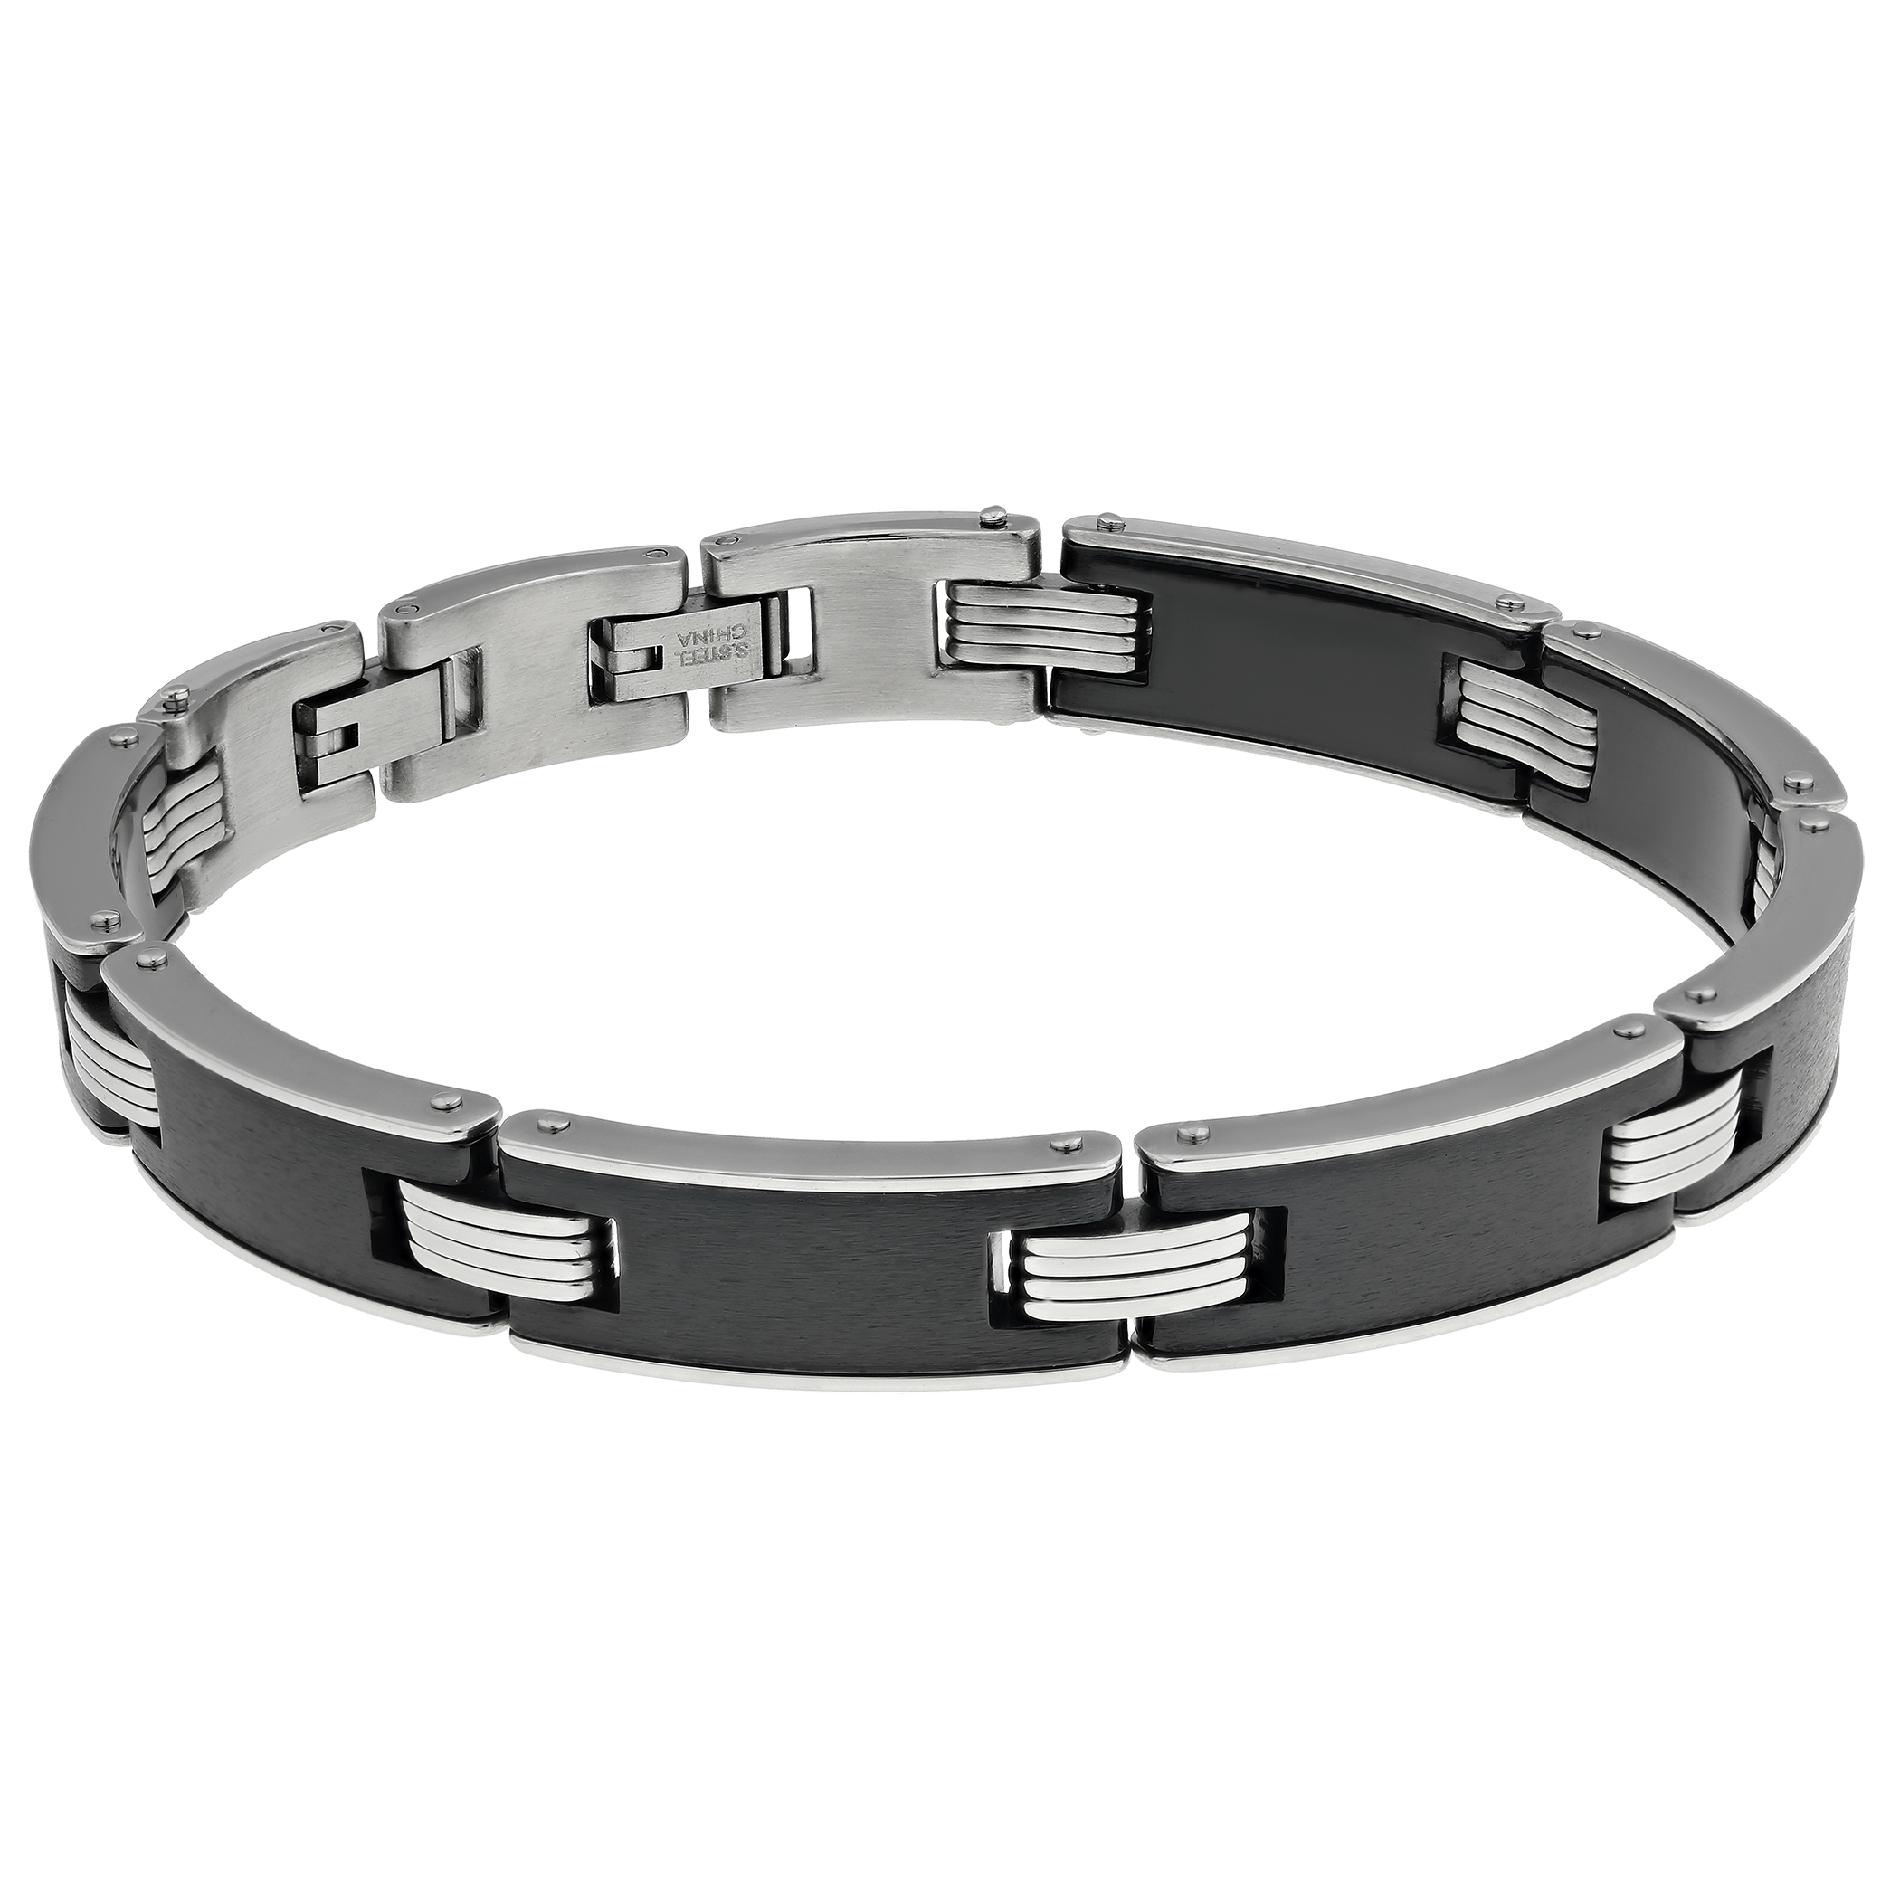 Stainless Steel Link Bracelet with Black Ceramic Accent